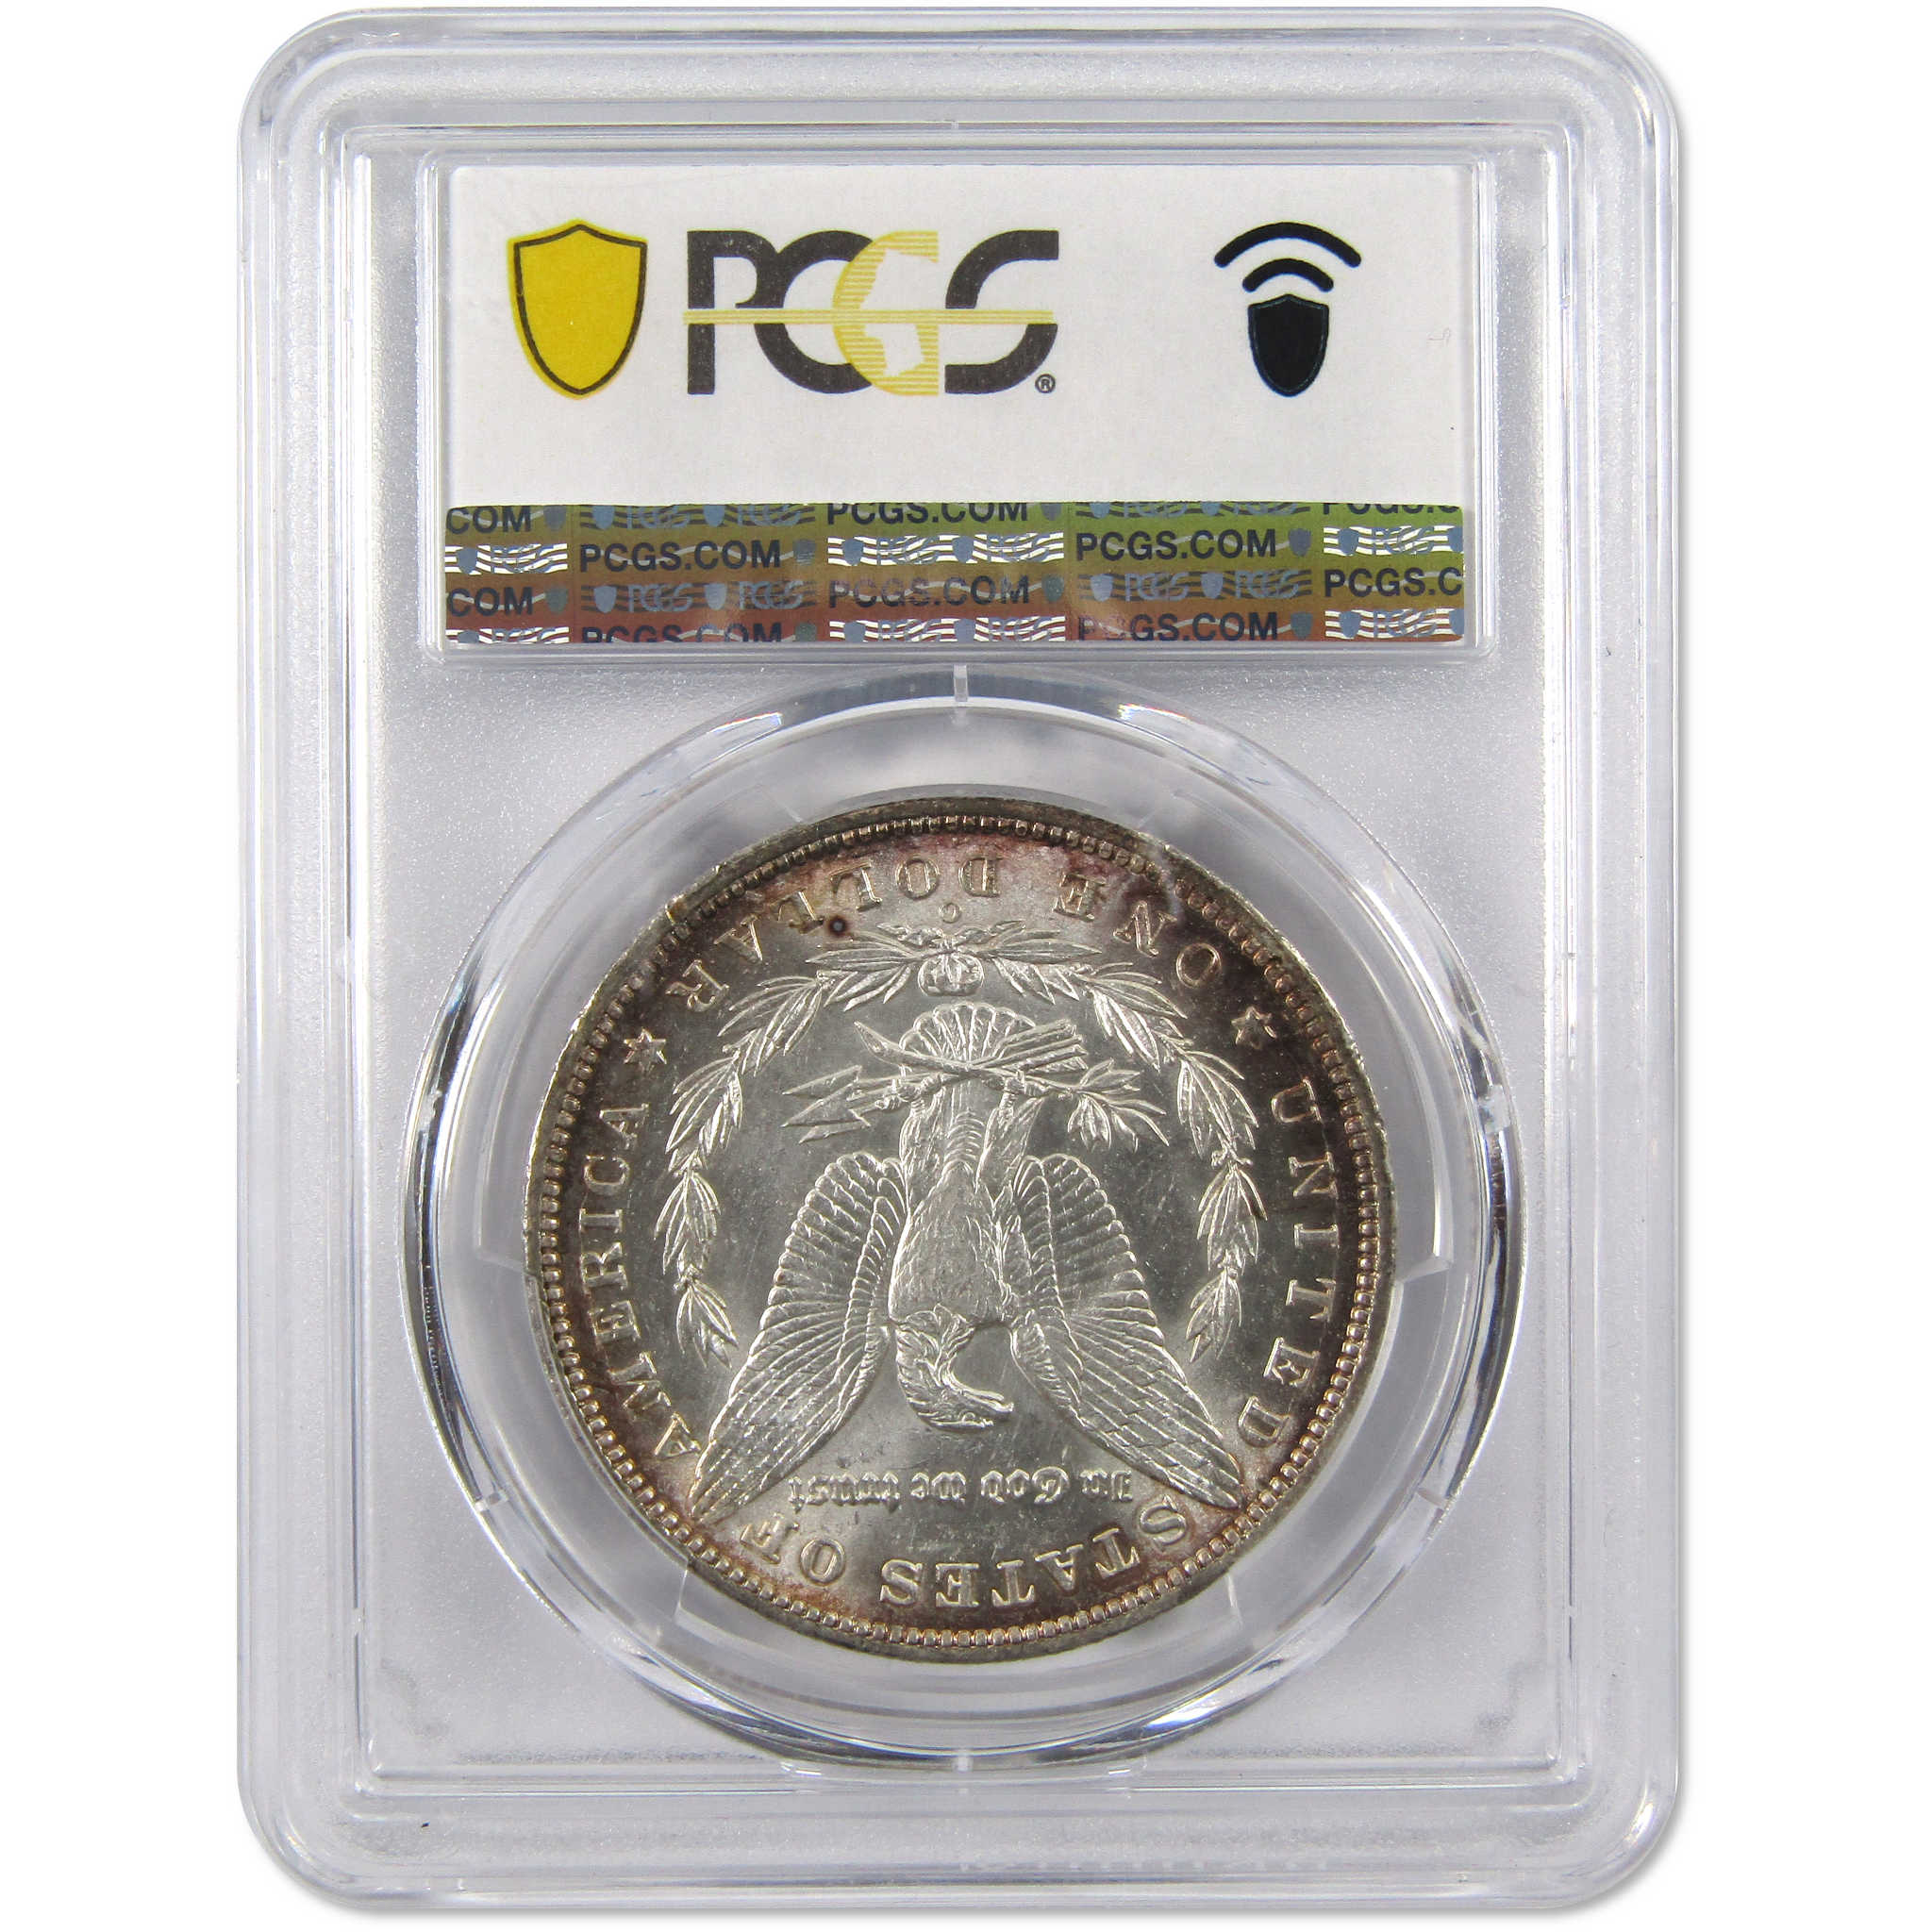 1896 O Morgan Dollar MS 61 PCGS Silver $1 Uncirculated Coin SKU:I9469 - Morgan coin - Morgan silver dollar - Morgan silver dollar for sale - Profile Coins &amp; Collectibles